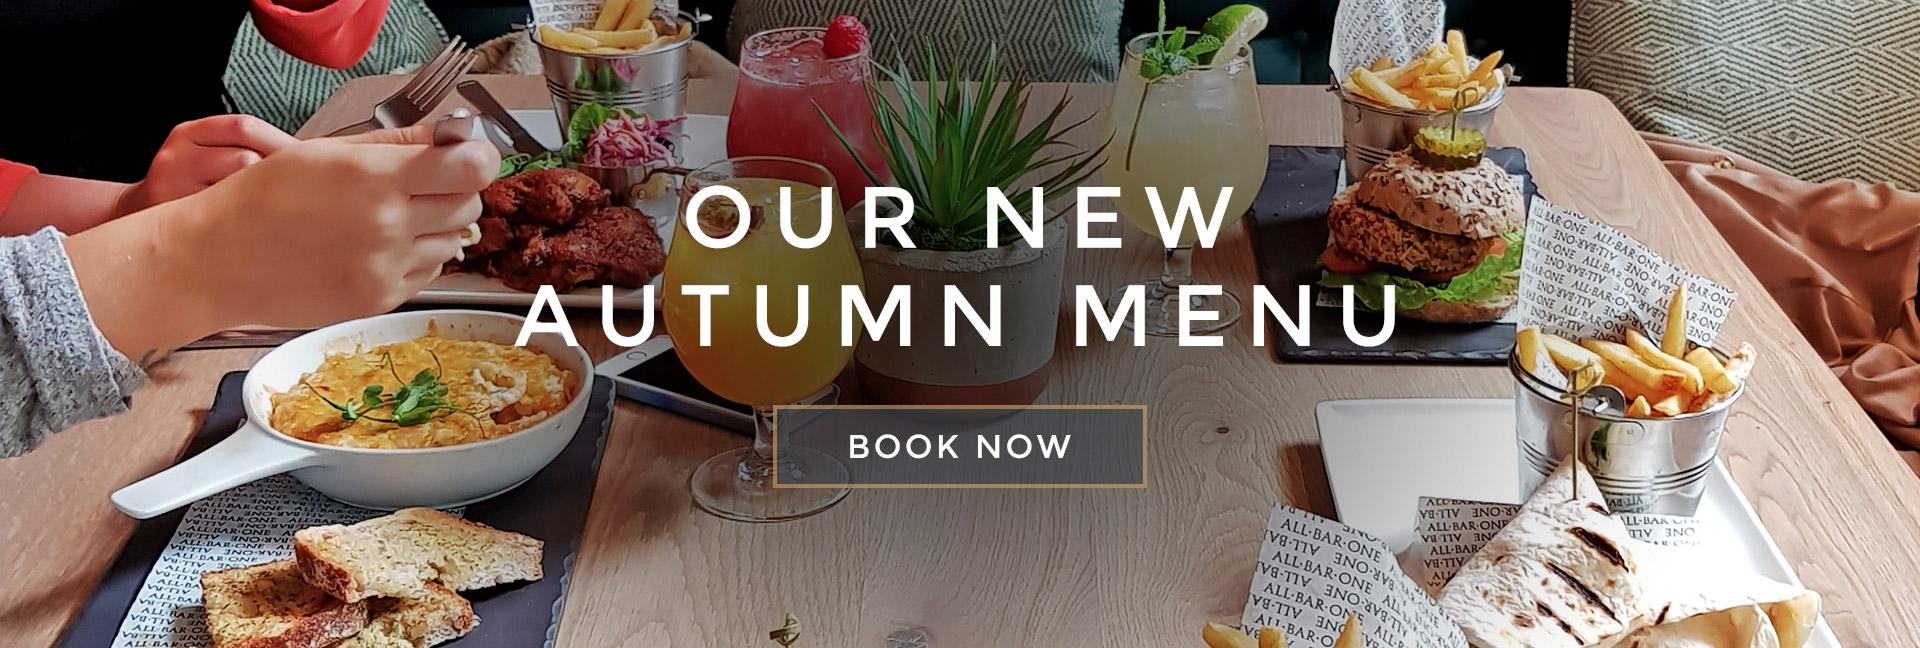 Our new Autumn menu at All Bar One Glasgow - Book now